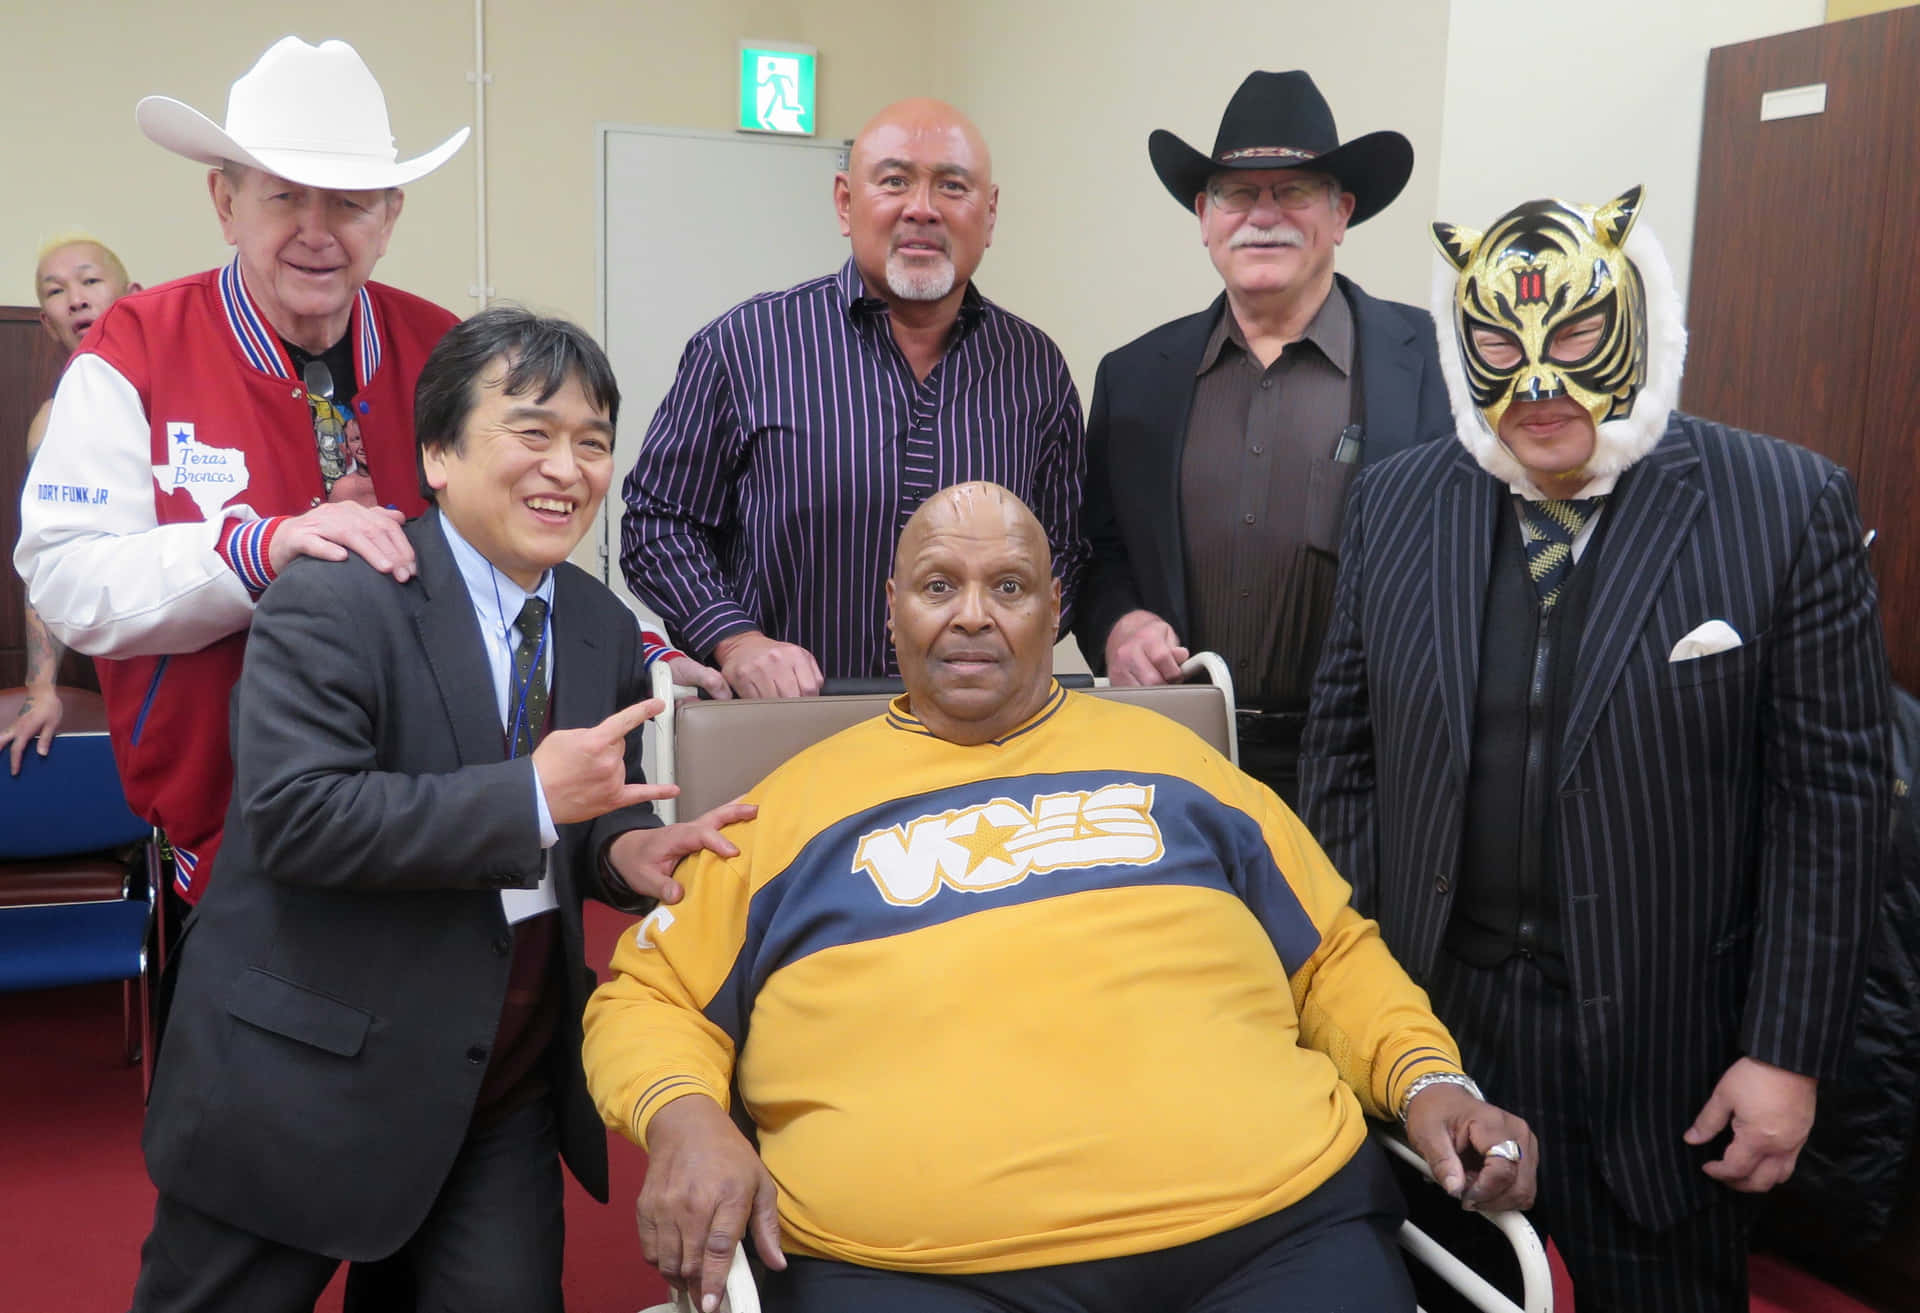 Abdullah The Butcher With Friends Wallpaper